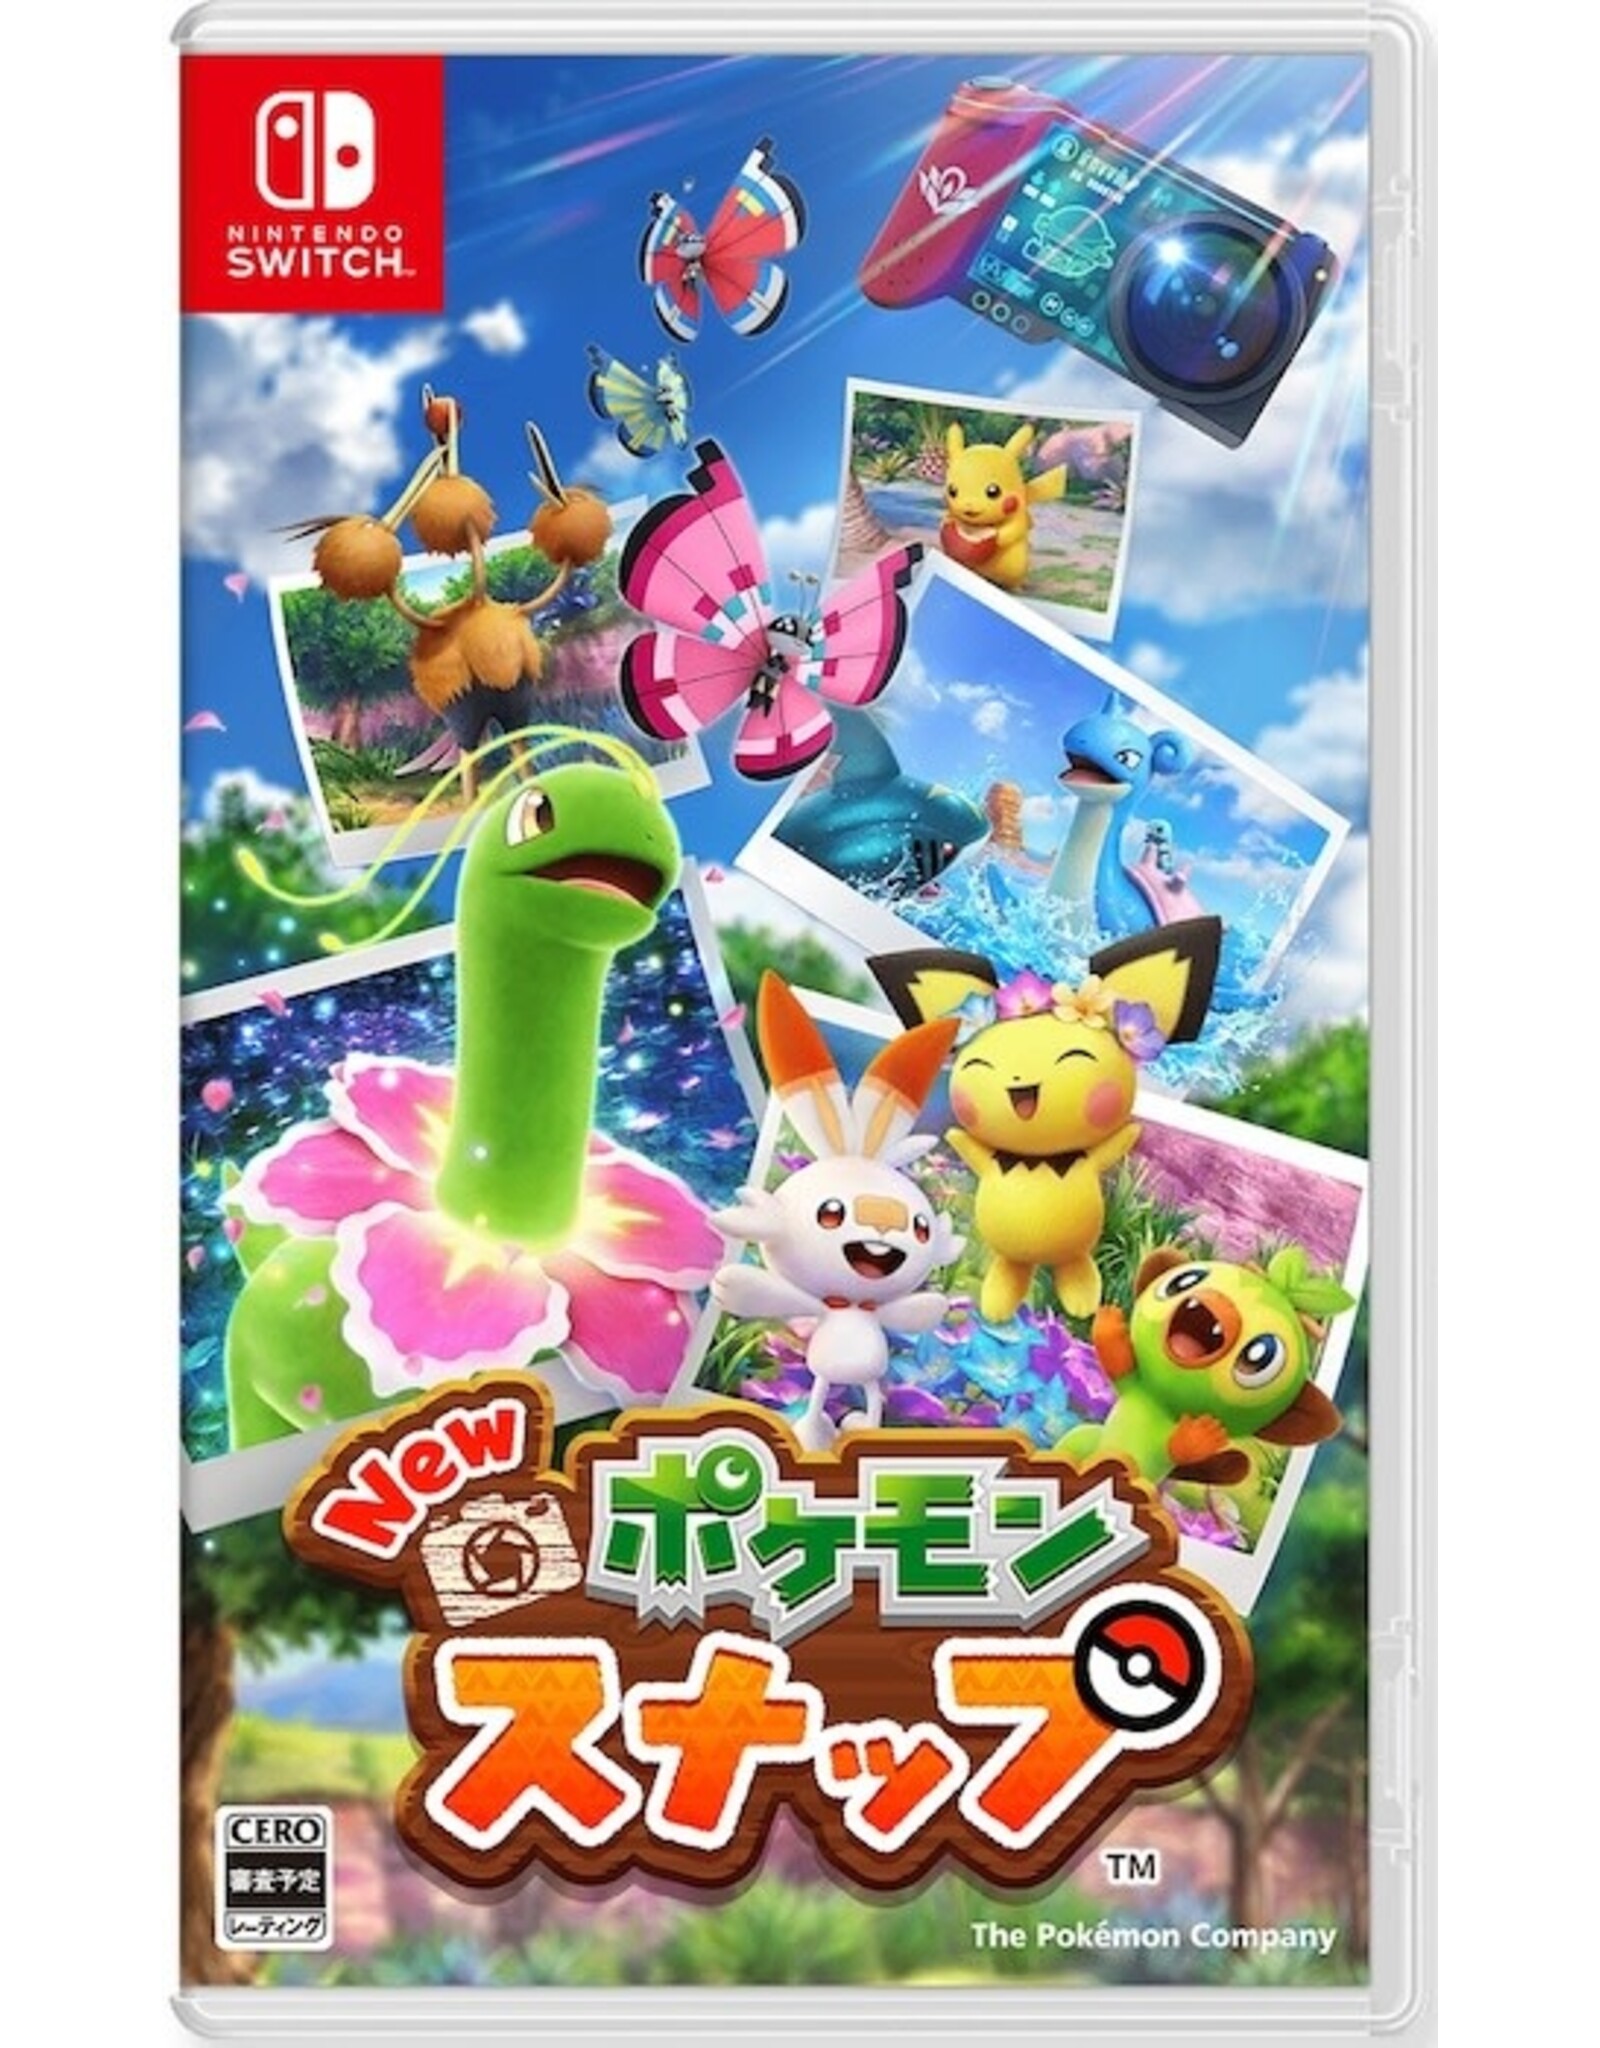 Nintendo Switch New Pokemon Snap with Geo Preorder Bag (Used, JP Import)